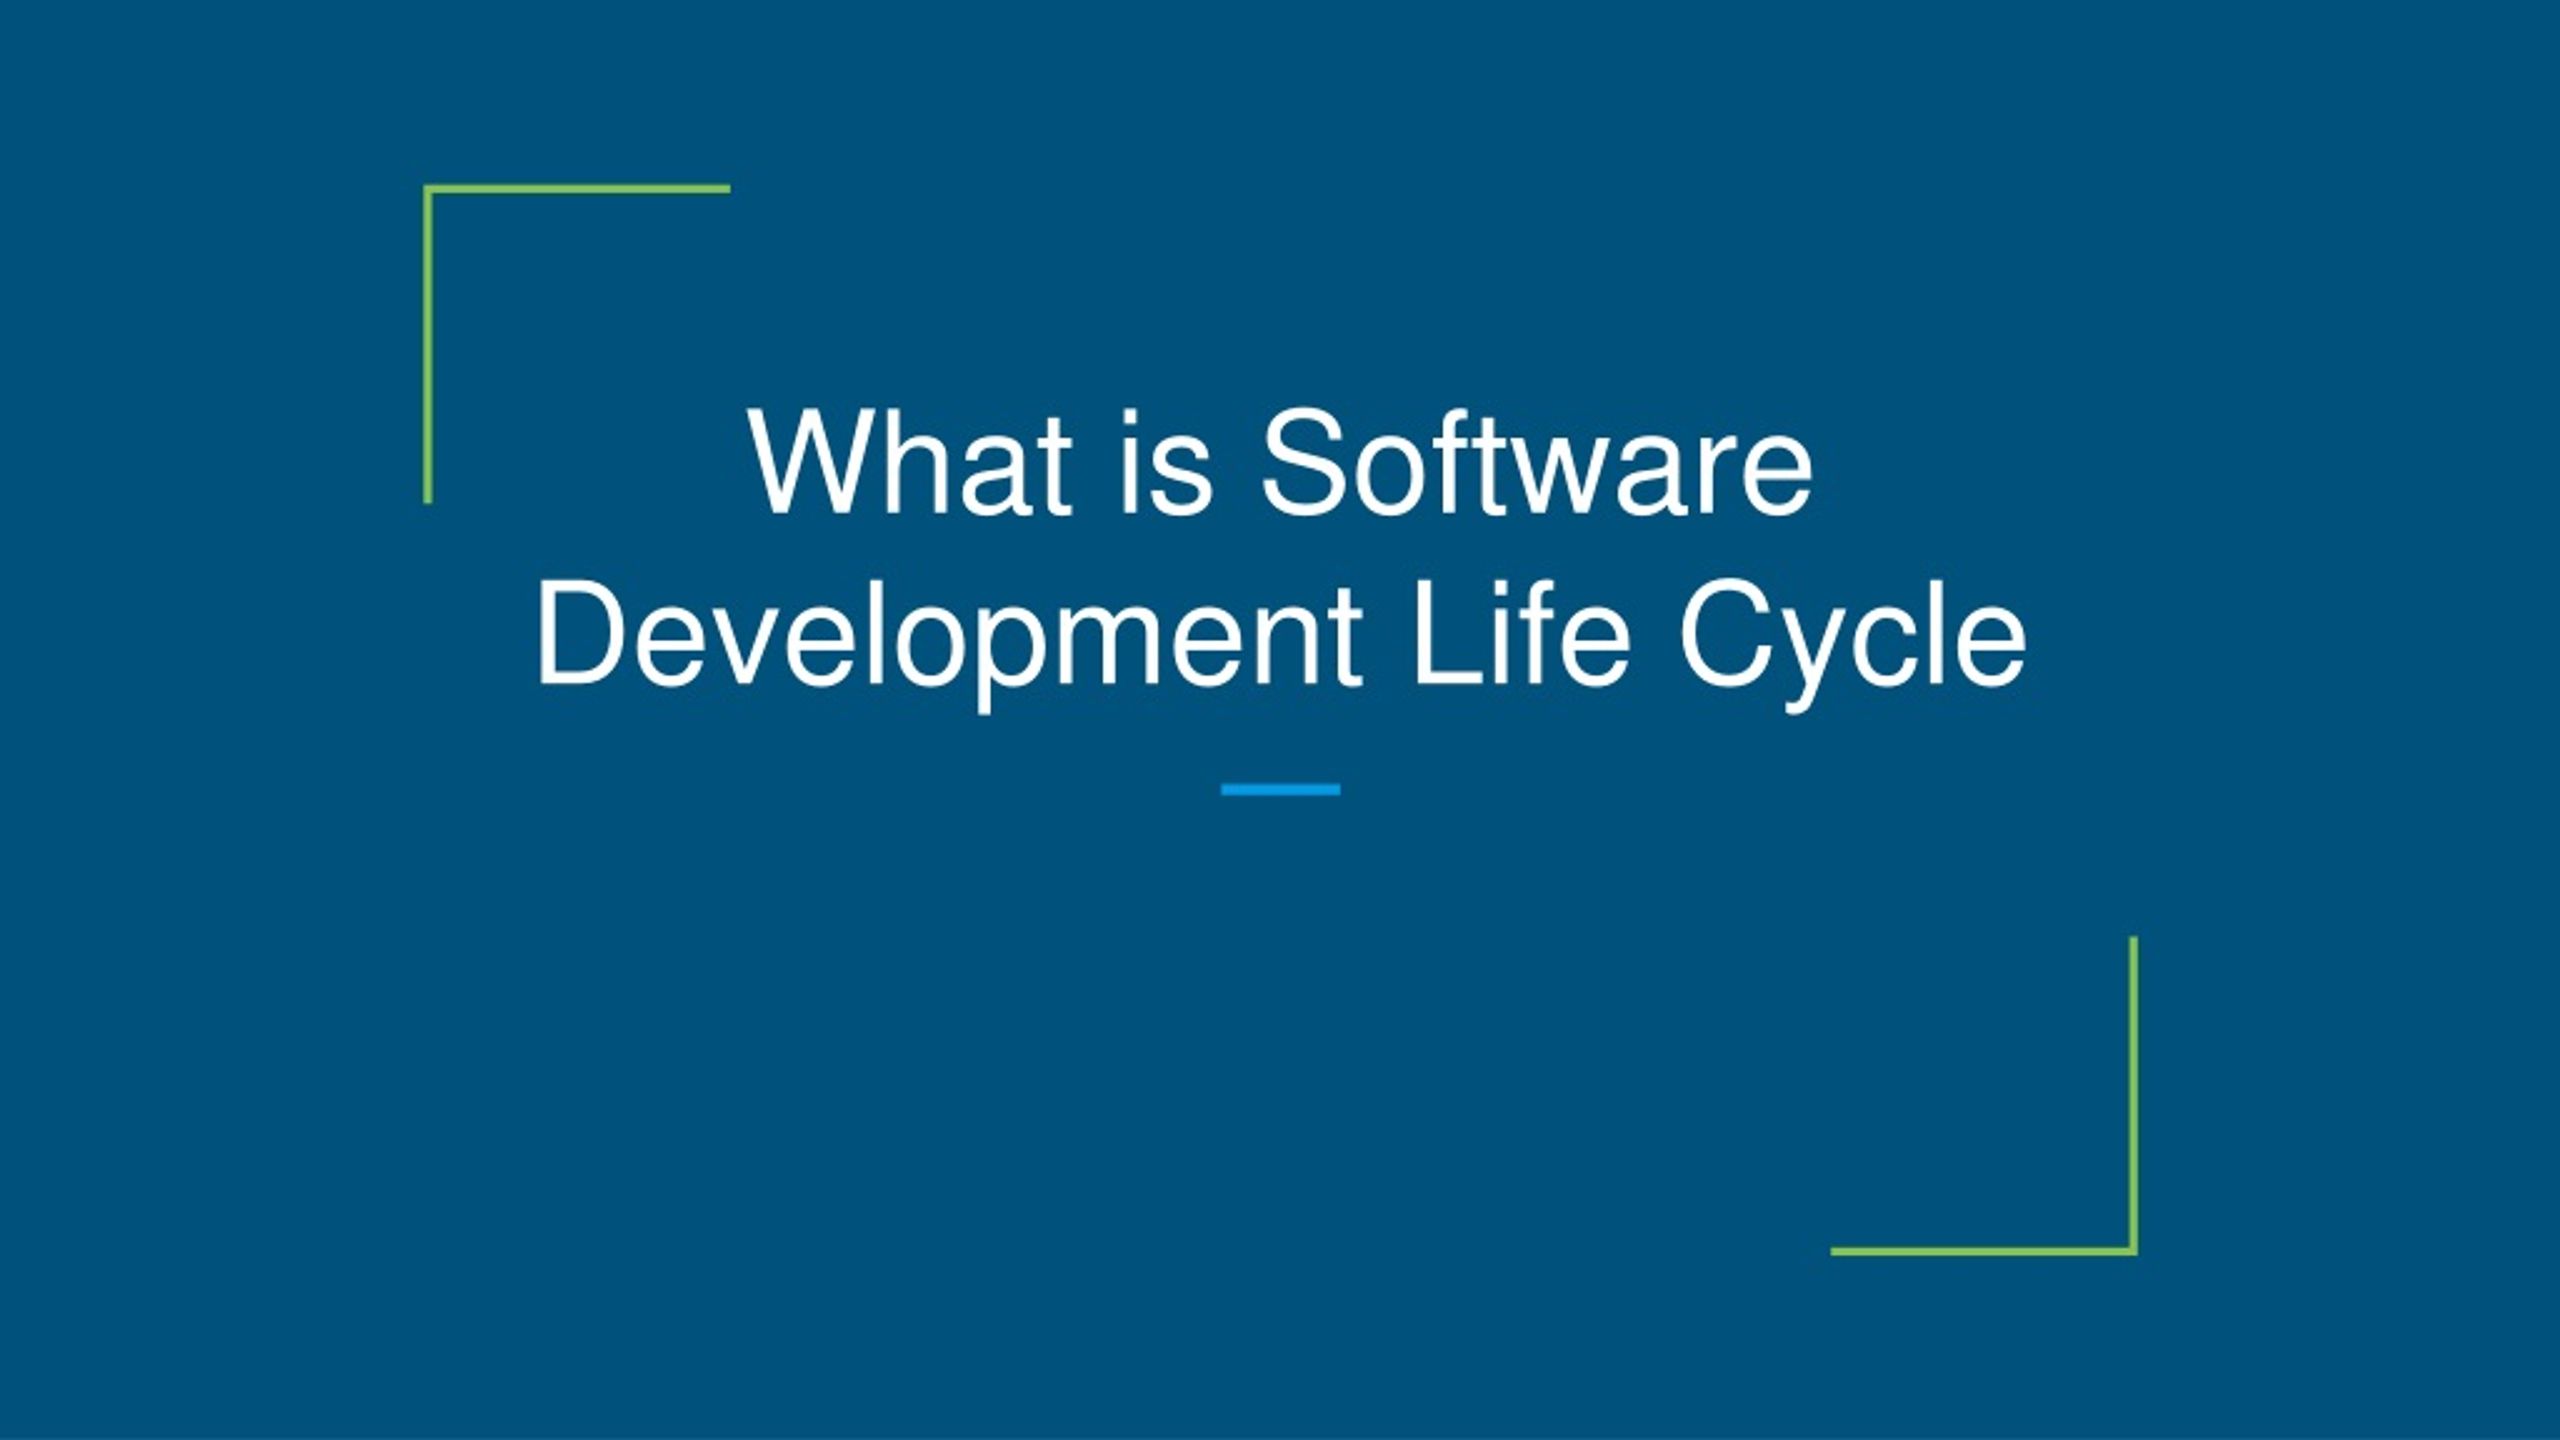 PPT - What is Software Development life Cycle PowerPoint Presentation ...